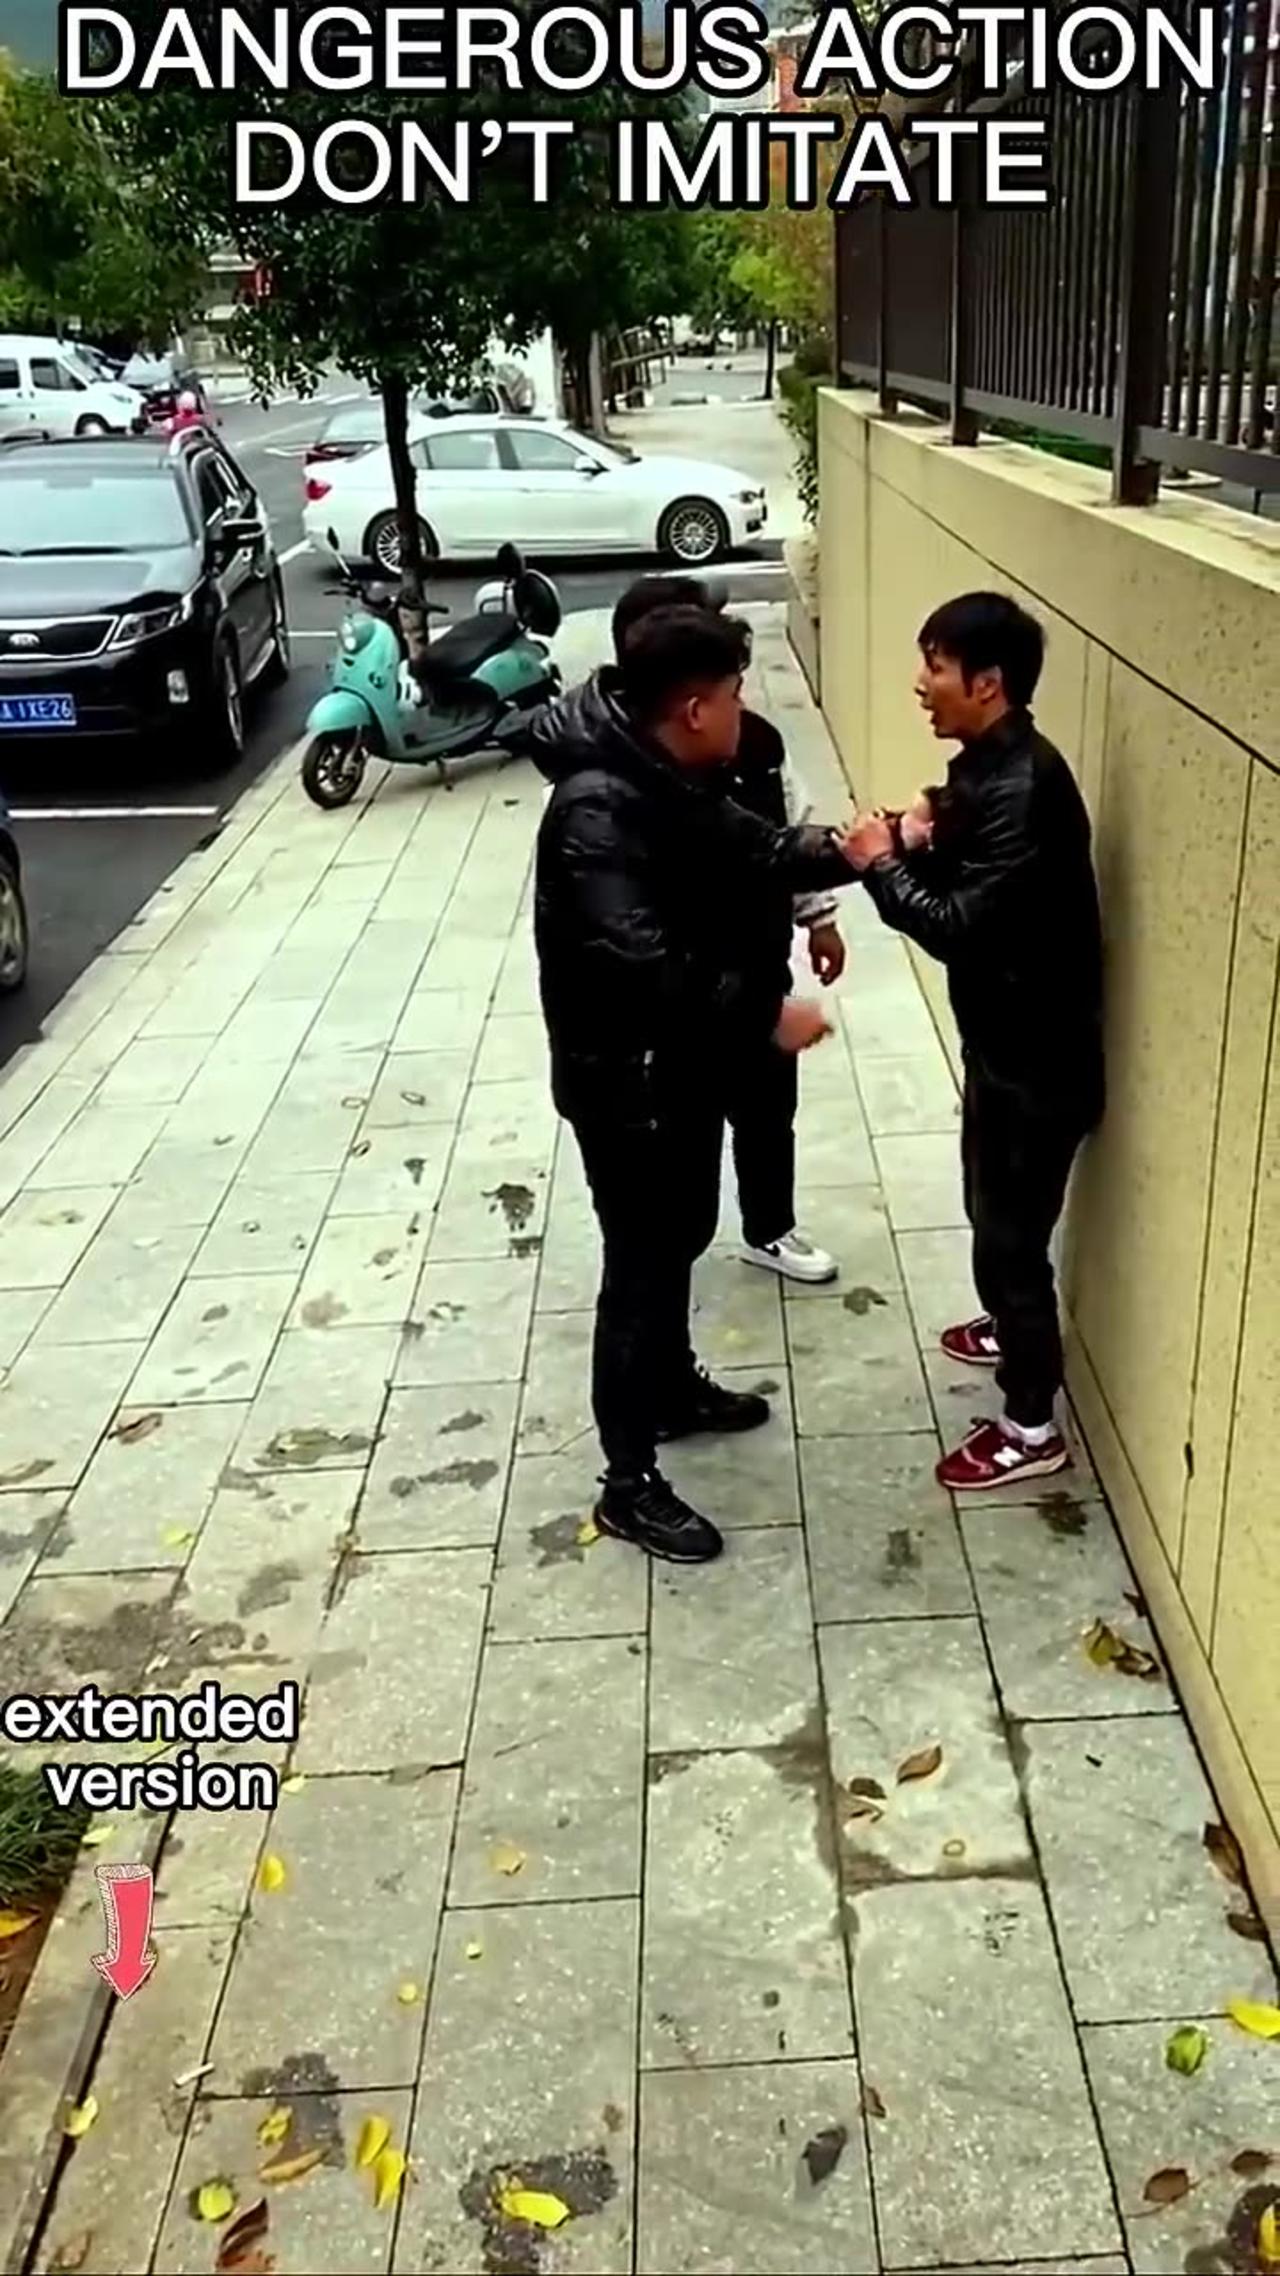 Chinese kung fu, actual street fighting, please do not imitate dangerous moves